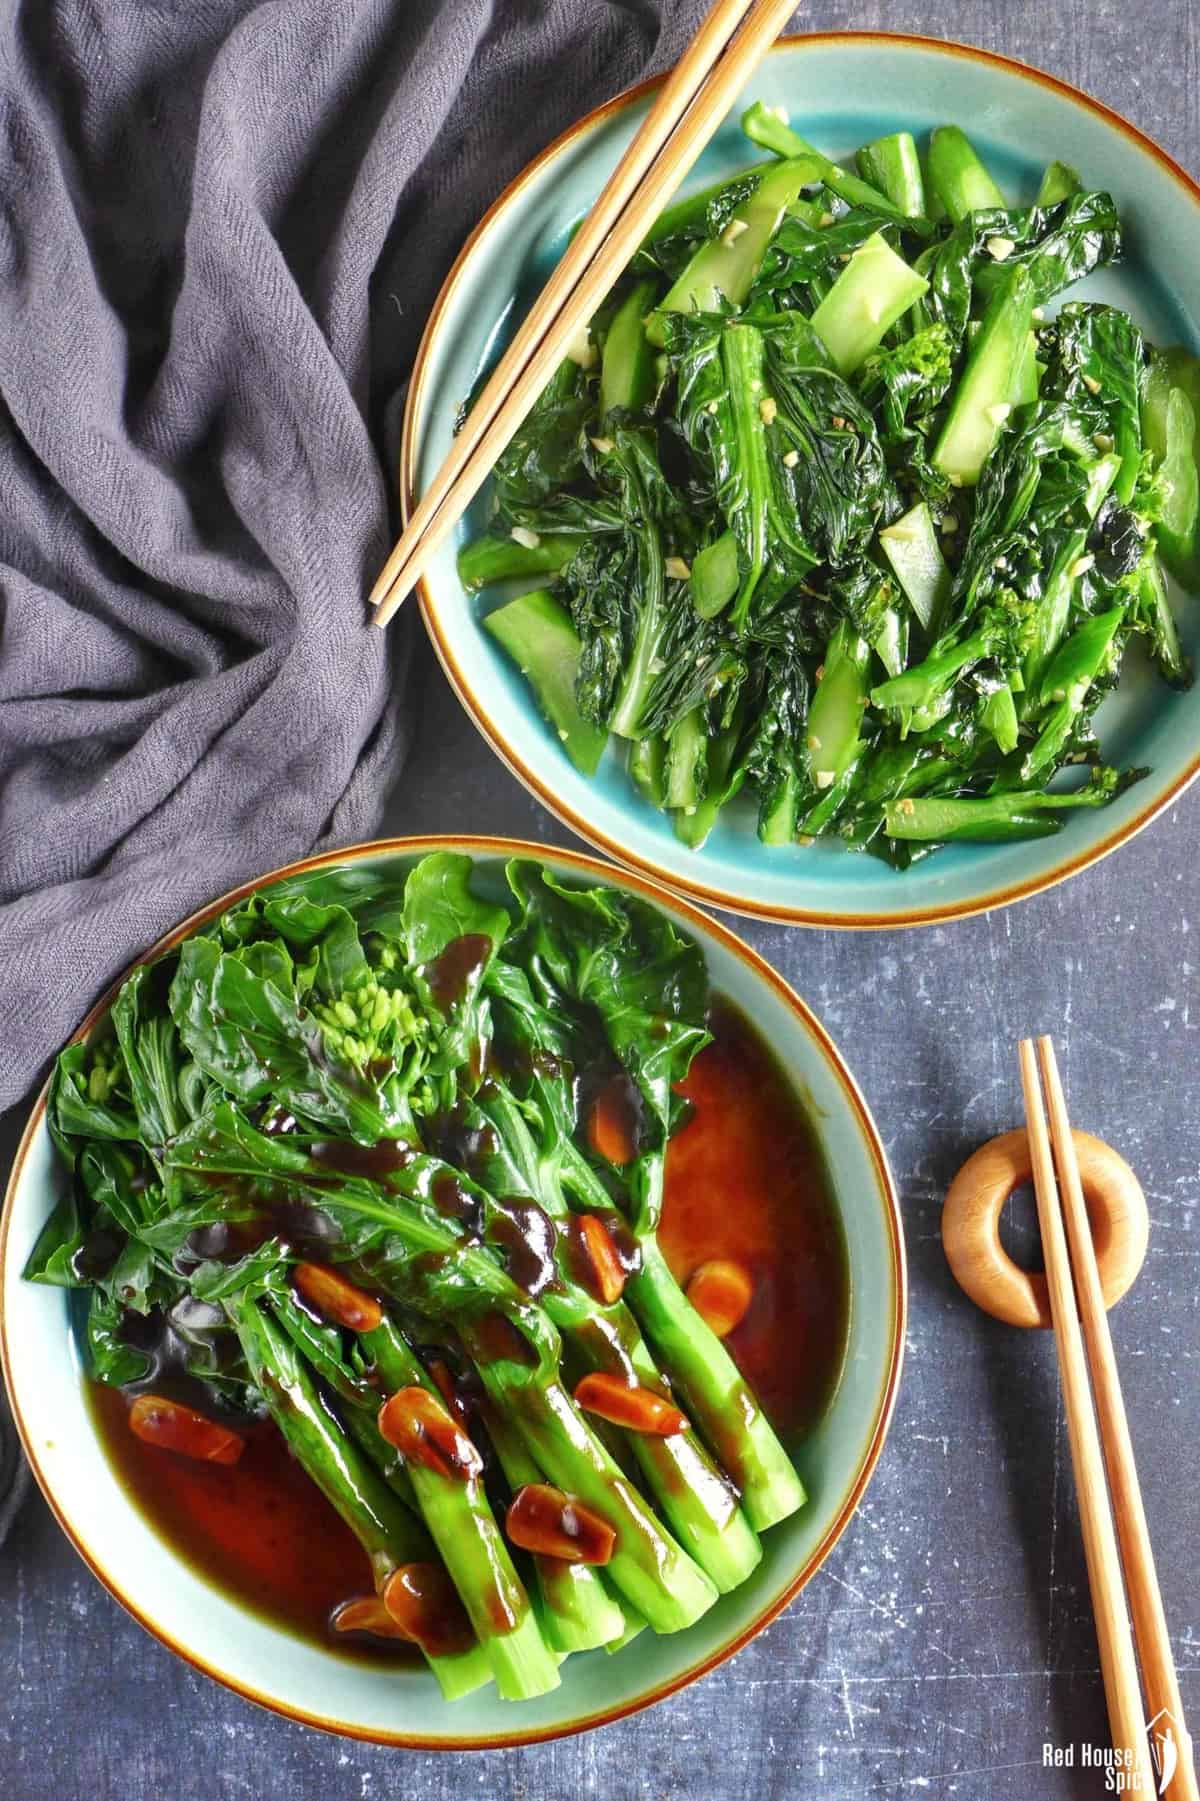 Chinese broccoli cooked in two ways, blanched with oyster sauce and stir-fried with garlic and ginger.